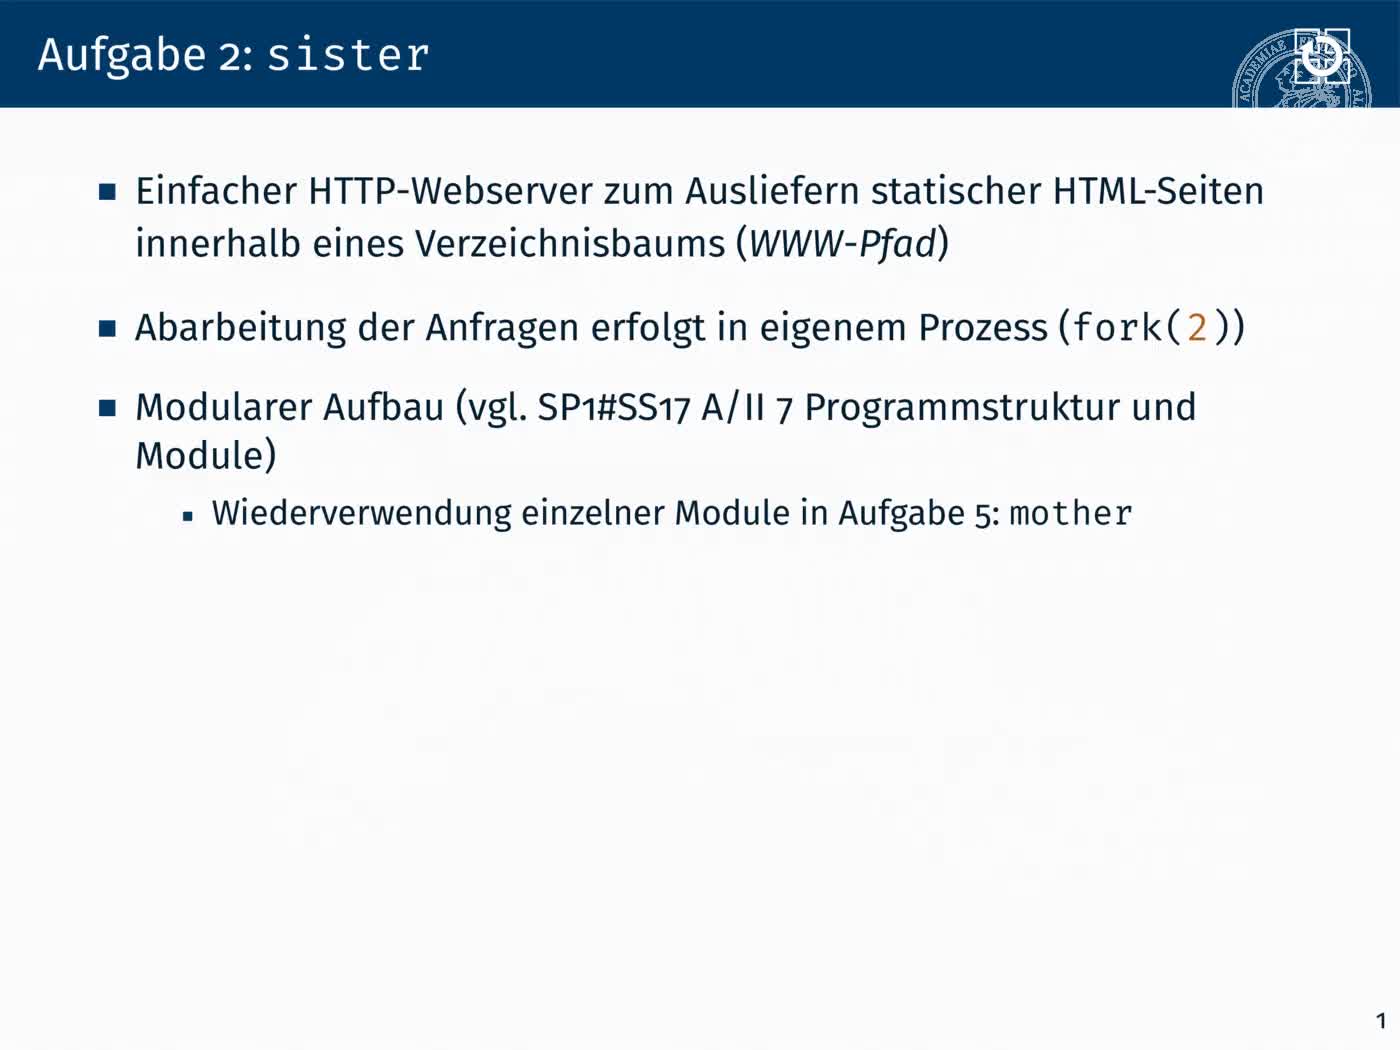 2.6 IPC + Signale: sister preview image